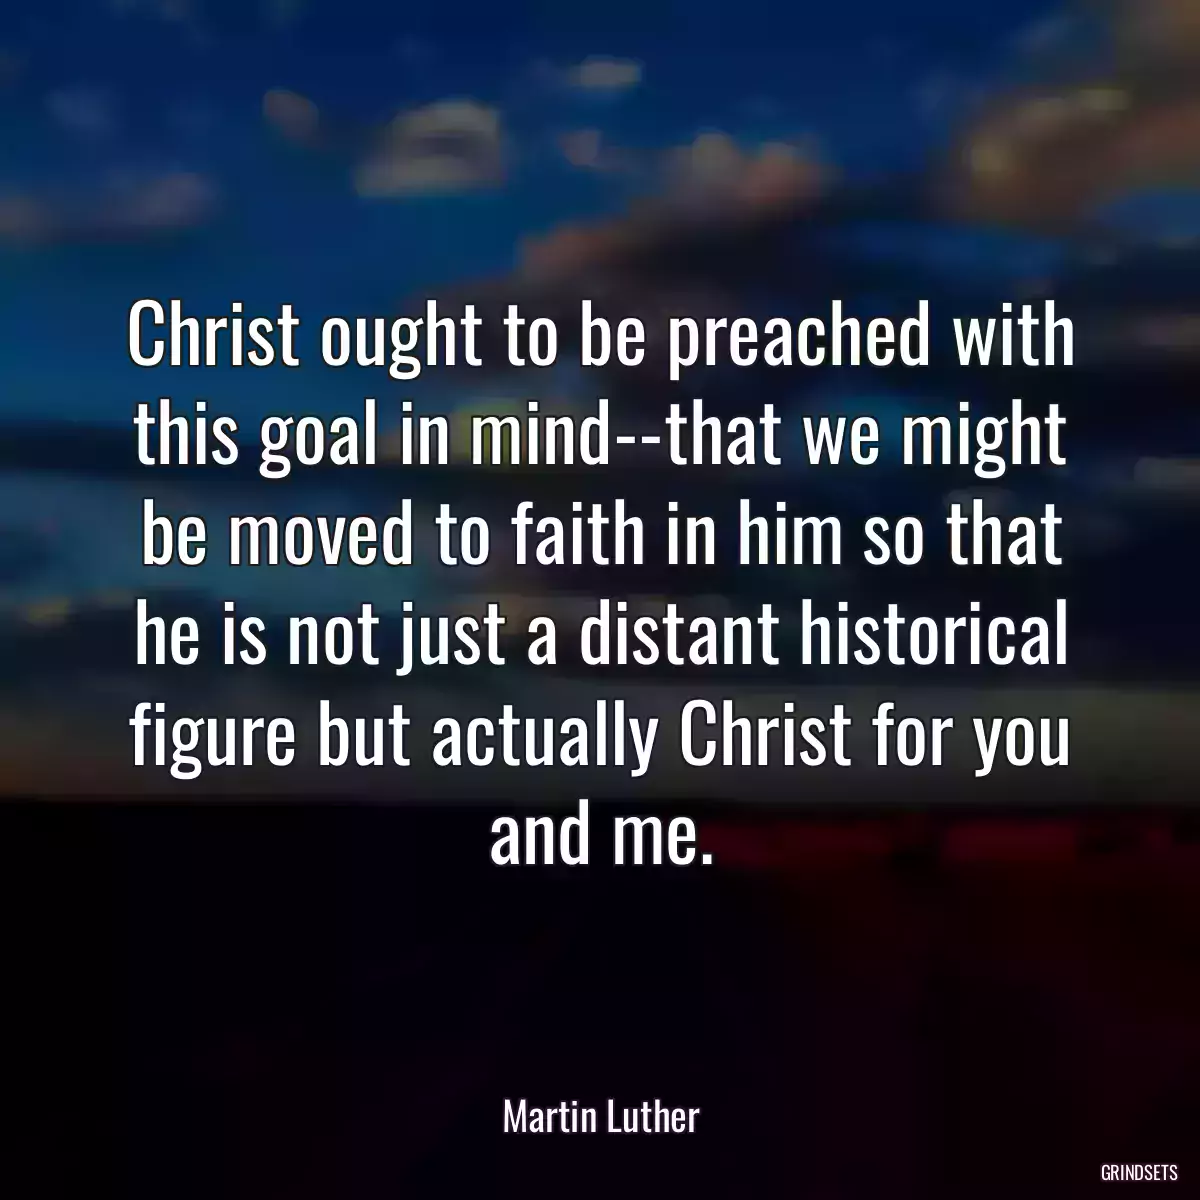 Christ ought to be preached with this goal in mind--that we might be moved to faith in him so that he is not just a distant historical figure but actually Christ for you and me.